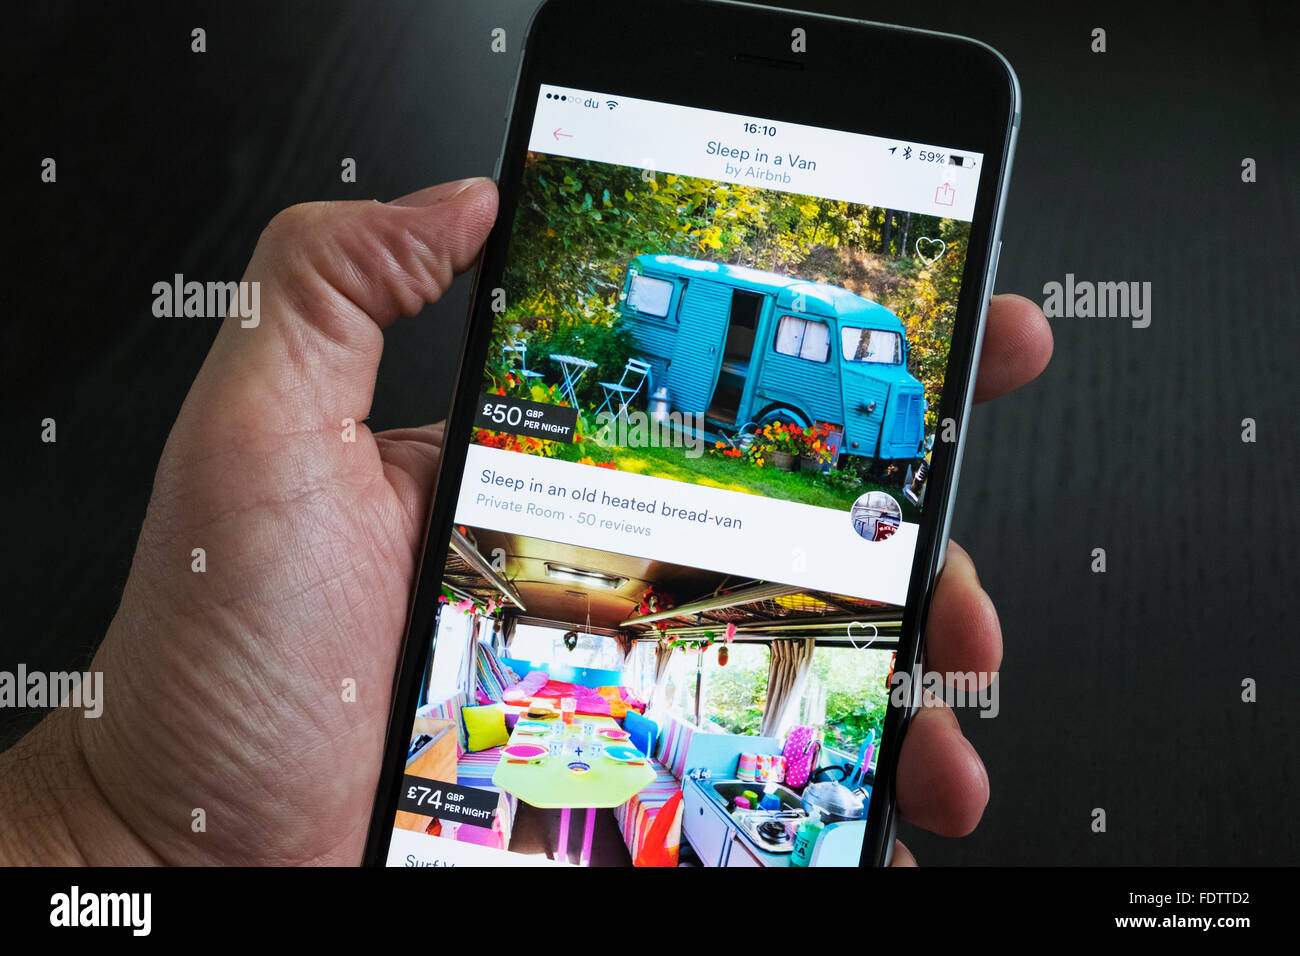 Airbnb holiday room booking app showing converted vans for rent on an iPhone 6 plus smart phone Stock Photo